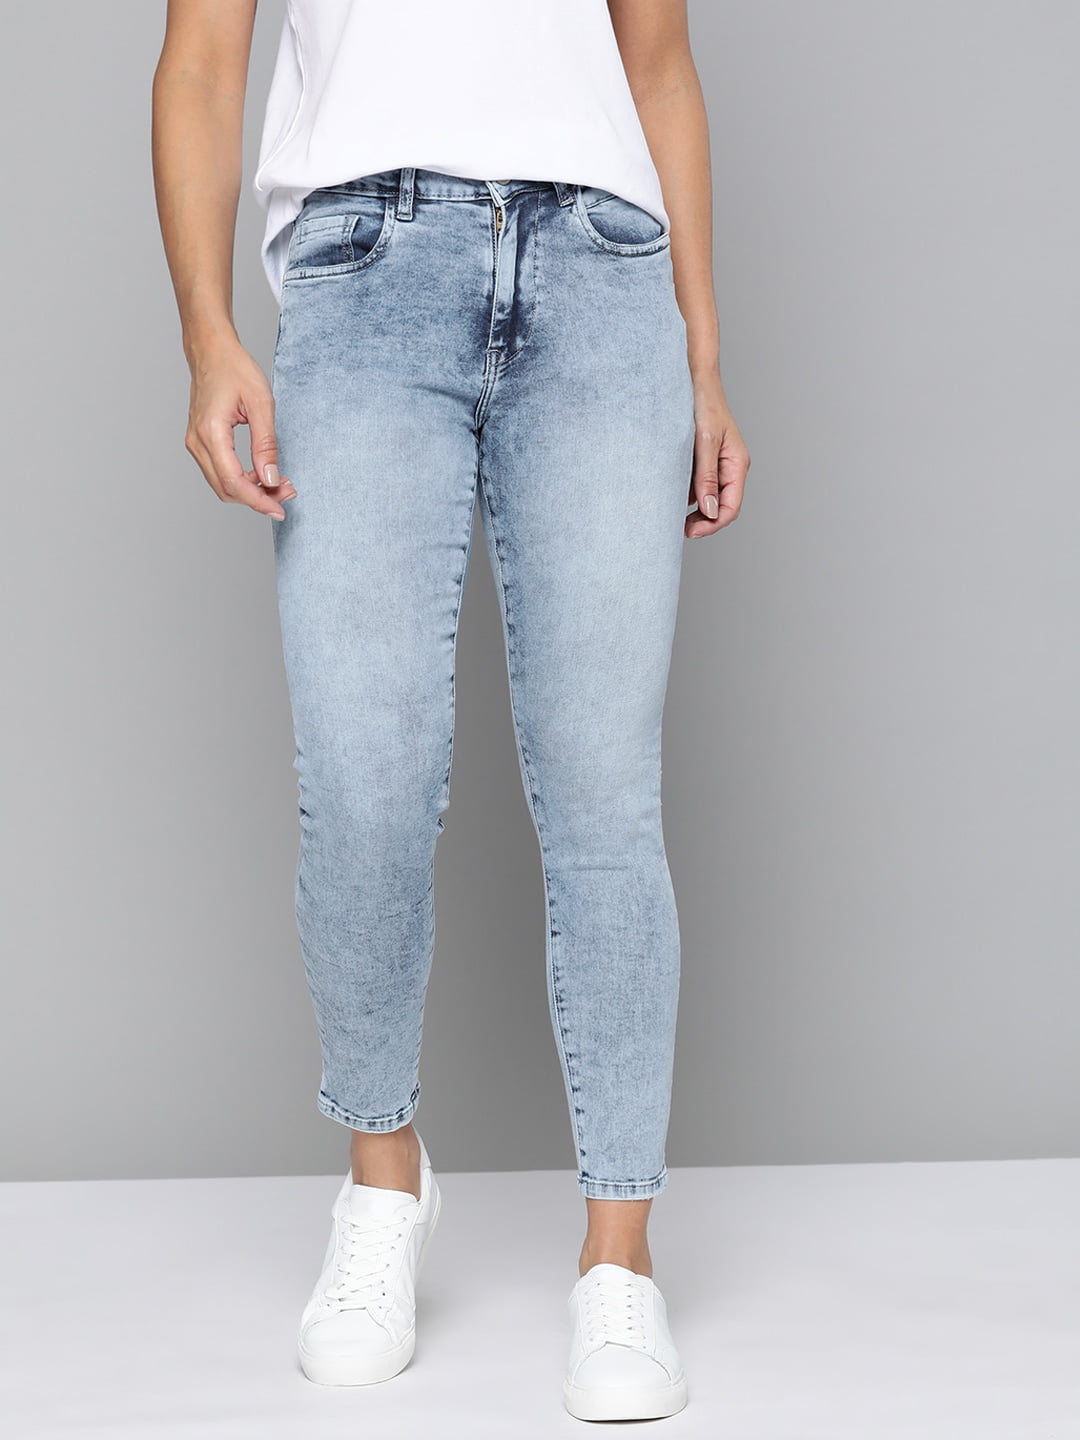 Buy French Connection Women Skinny Fit Light Fade Stretchable Mid Rise Jeans  - Jeans for Women 21982052 | Myntra